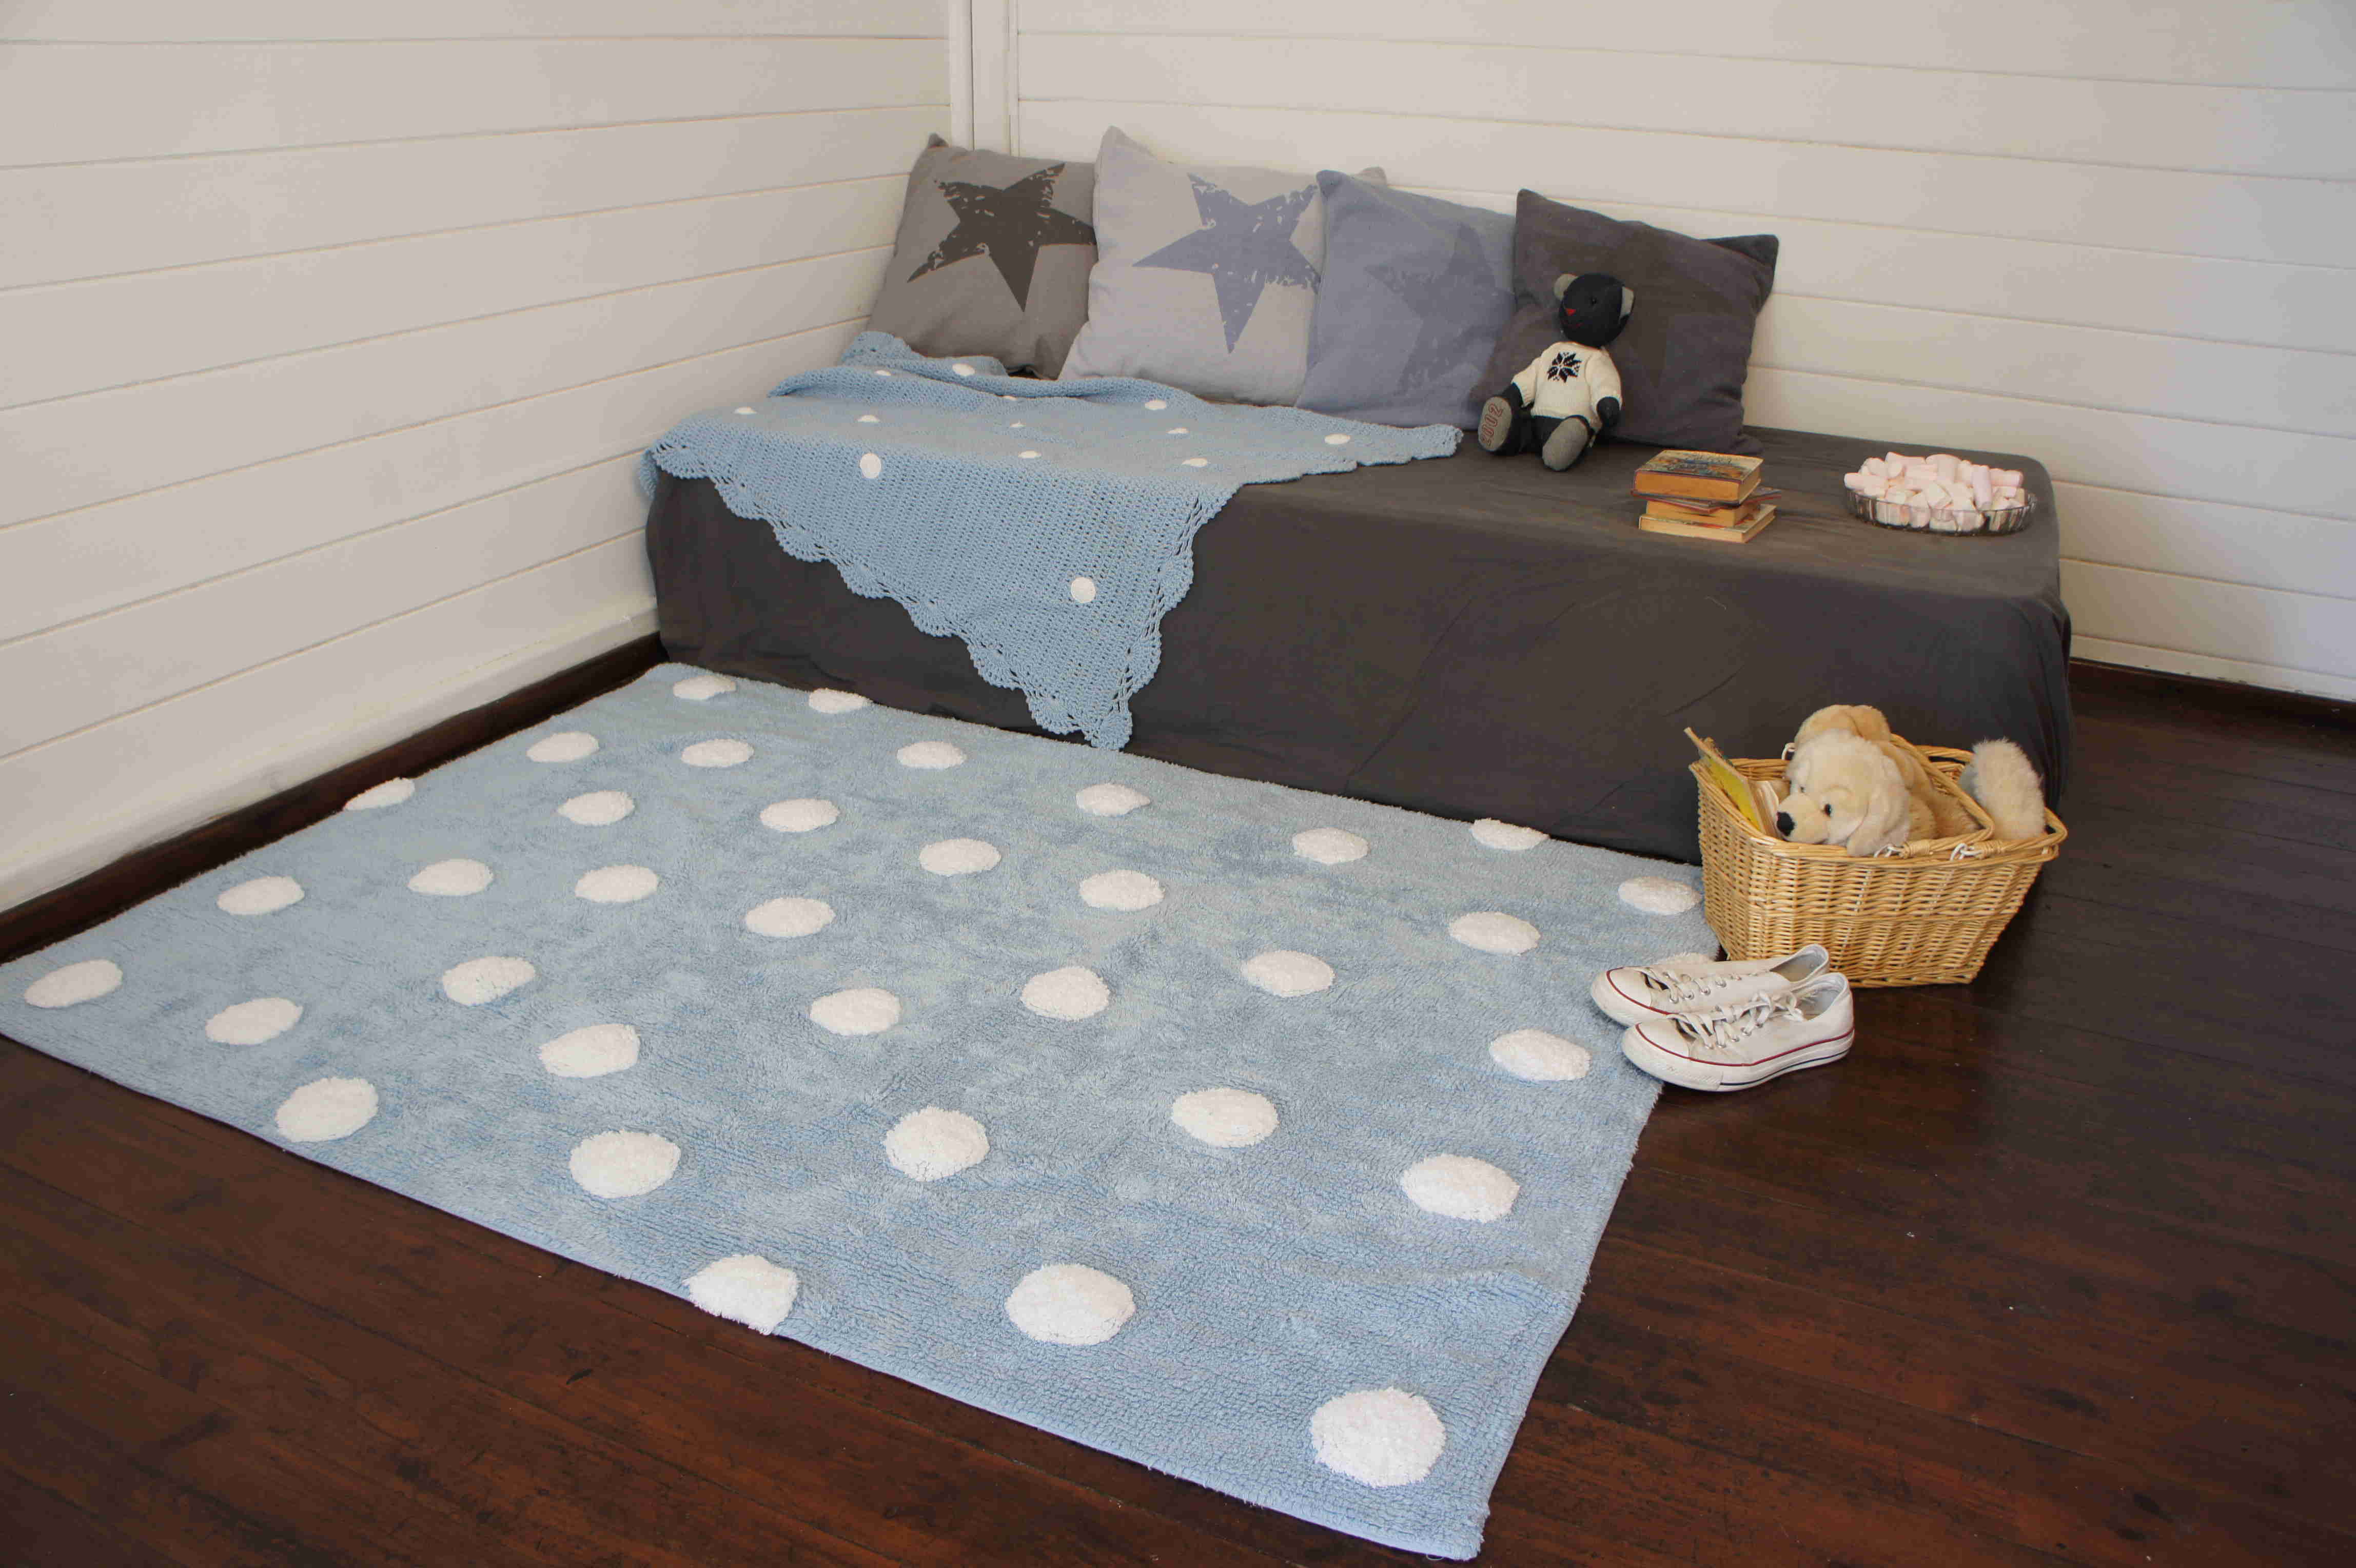 Rectangular blue cotton rug decorated with white polka dots